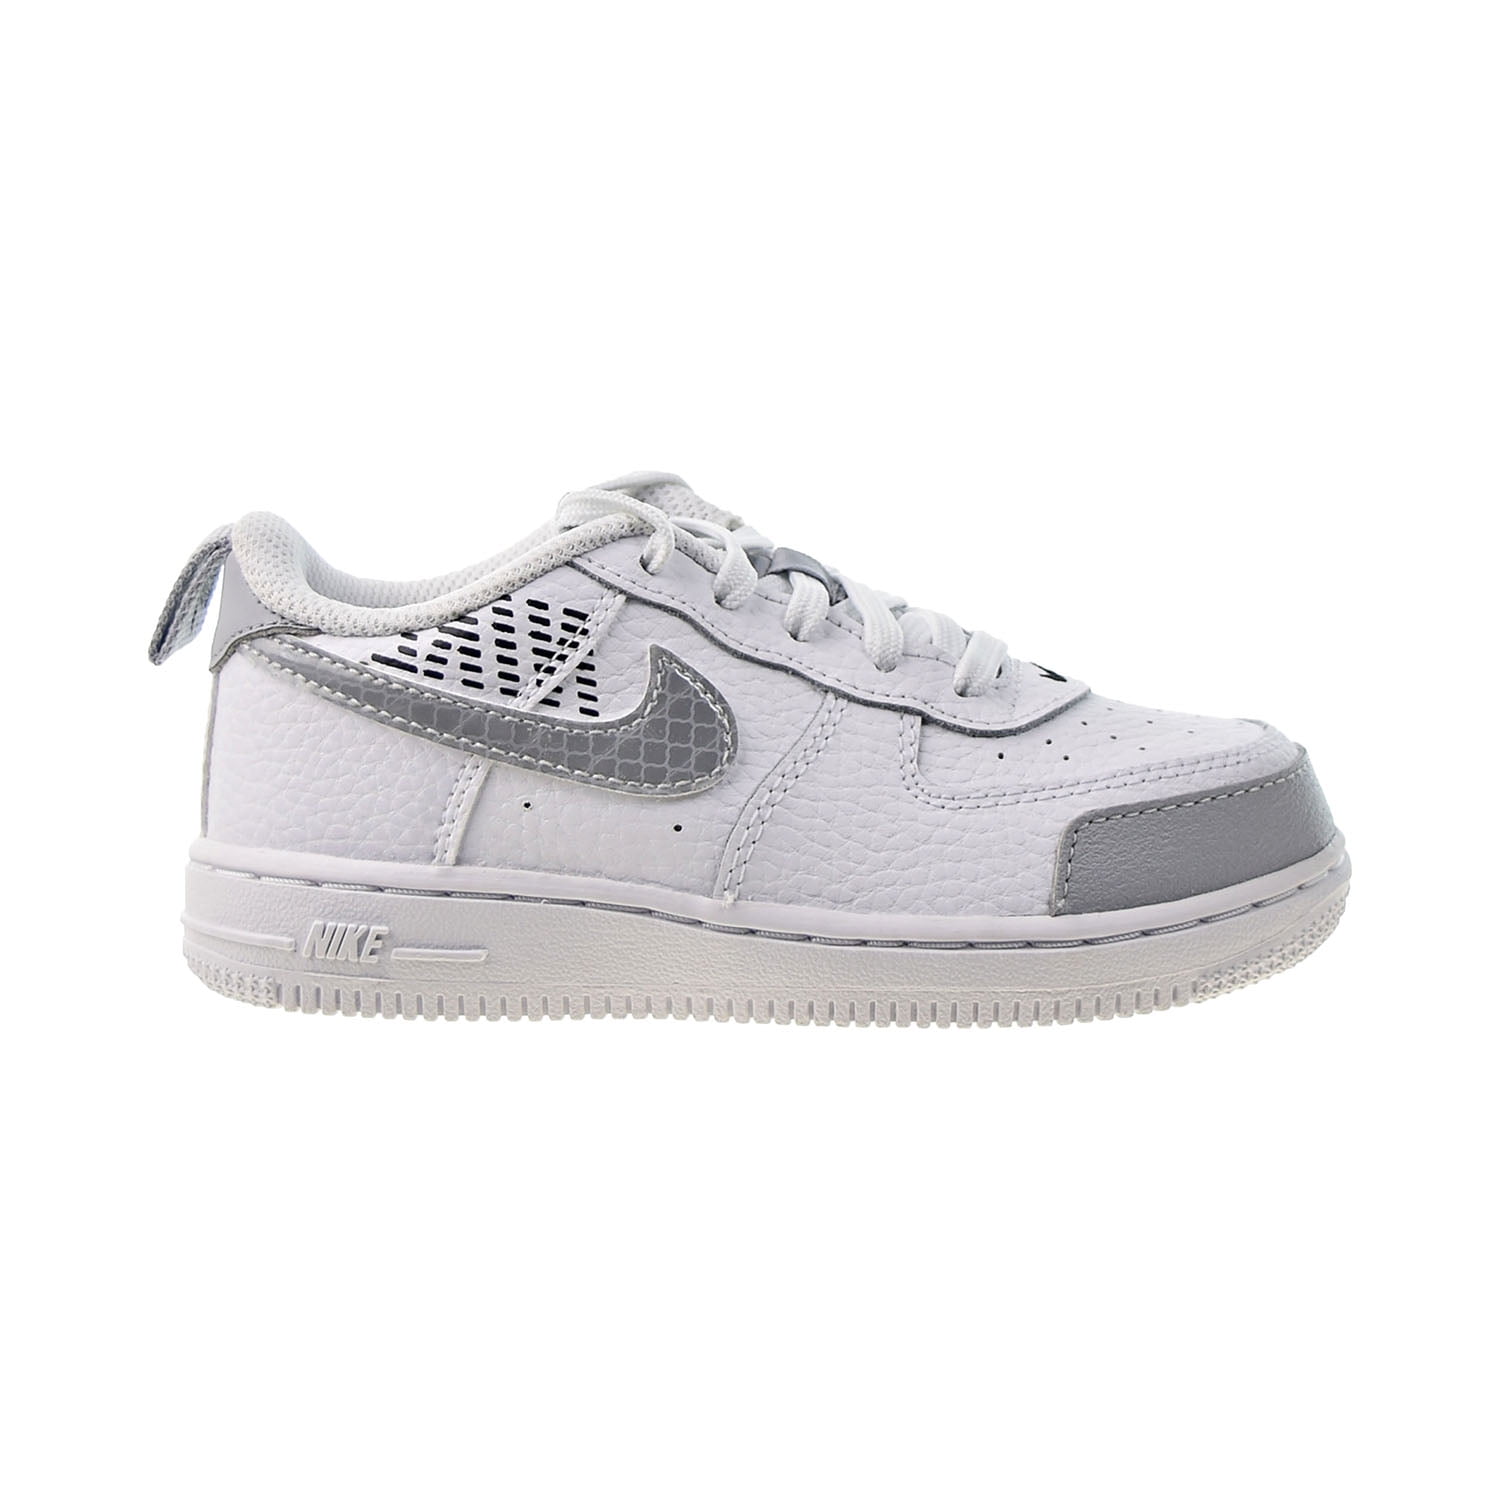 Nike Air Force 1 Low LV8 Toddler Shoes Multi-Color Sneakers DQ7769-100 Kids  6C